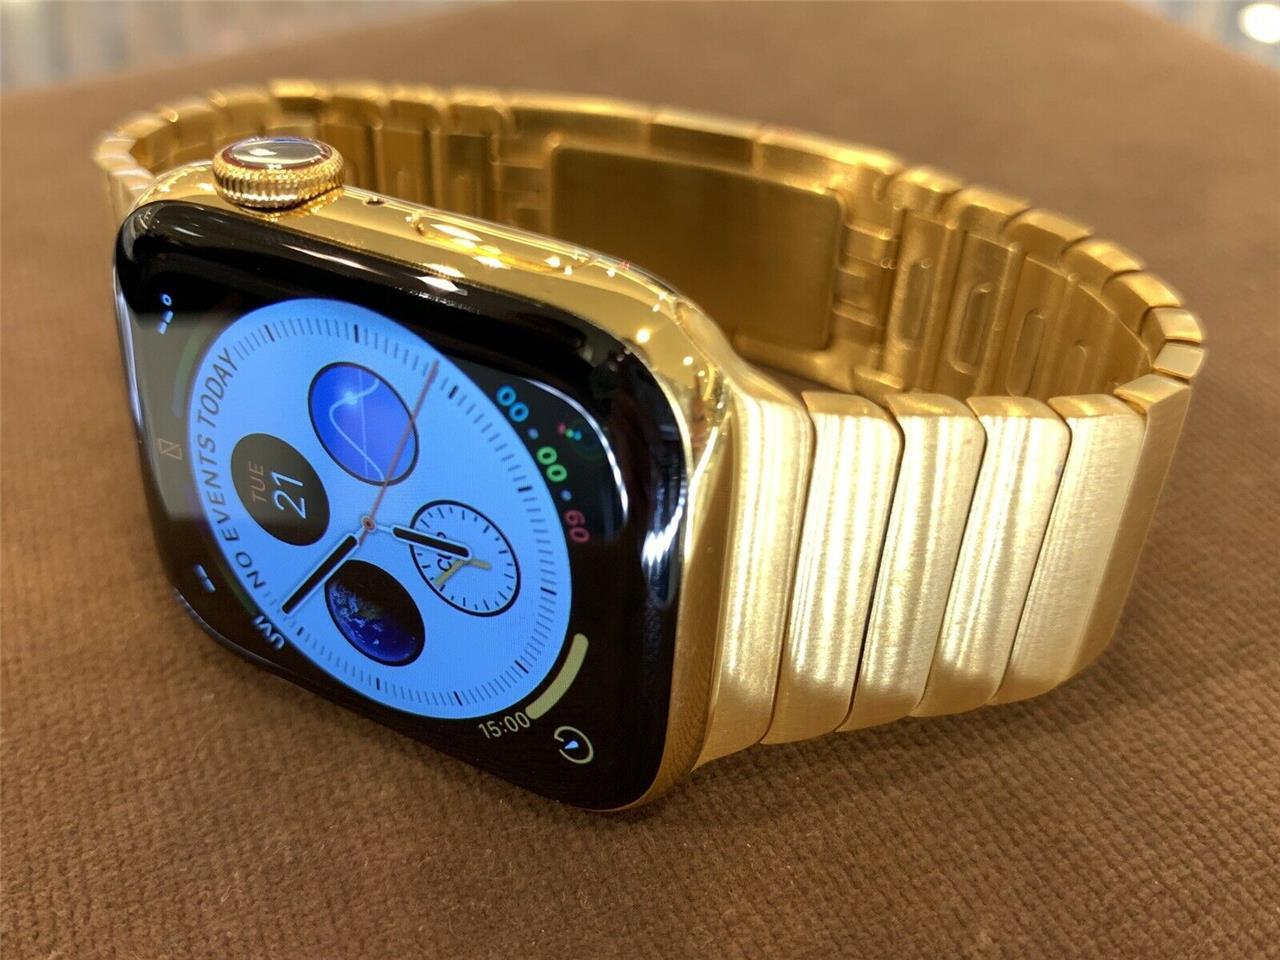 24K Gold Plated 44MM Apple Watch SERIES 6 Stainless Steel Link GPS LTE O2 CUSTOM - $854.05